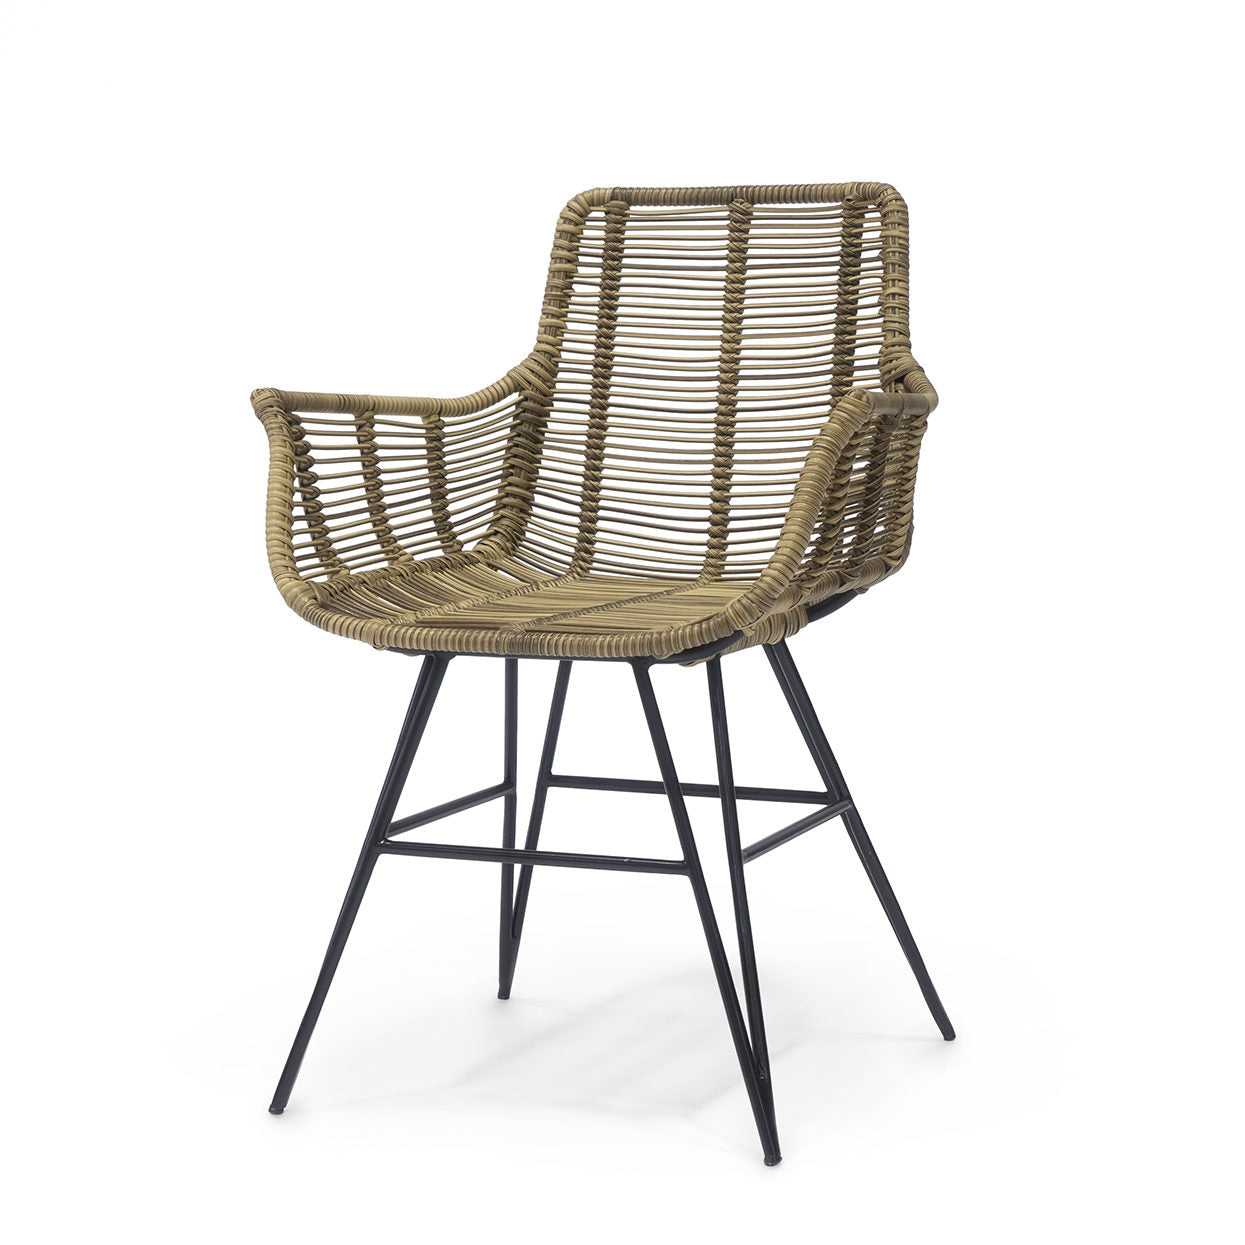 HERMOSA OUTDOOR ARM CHAIR